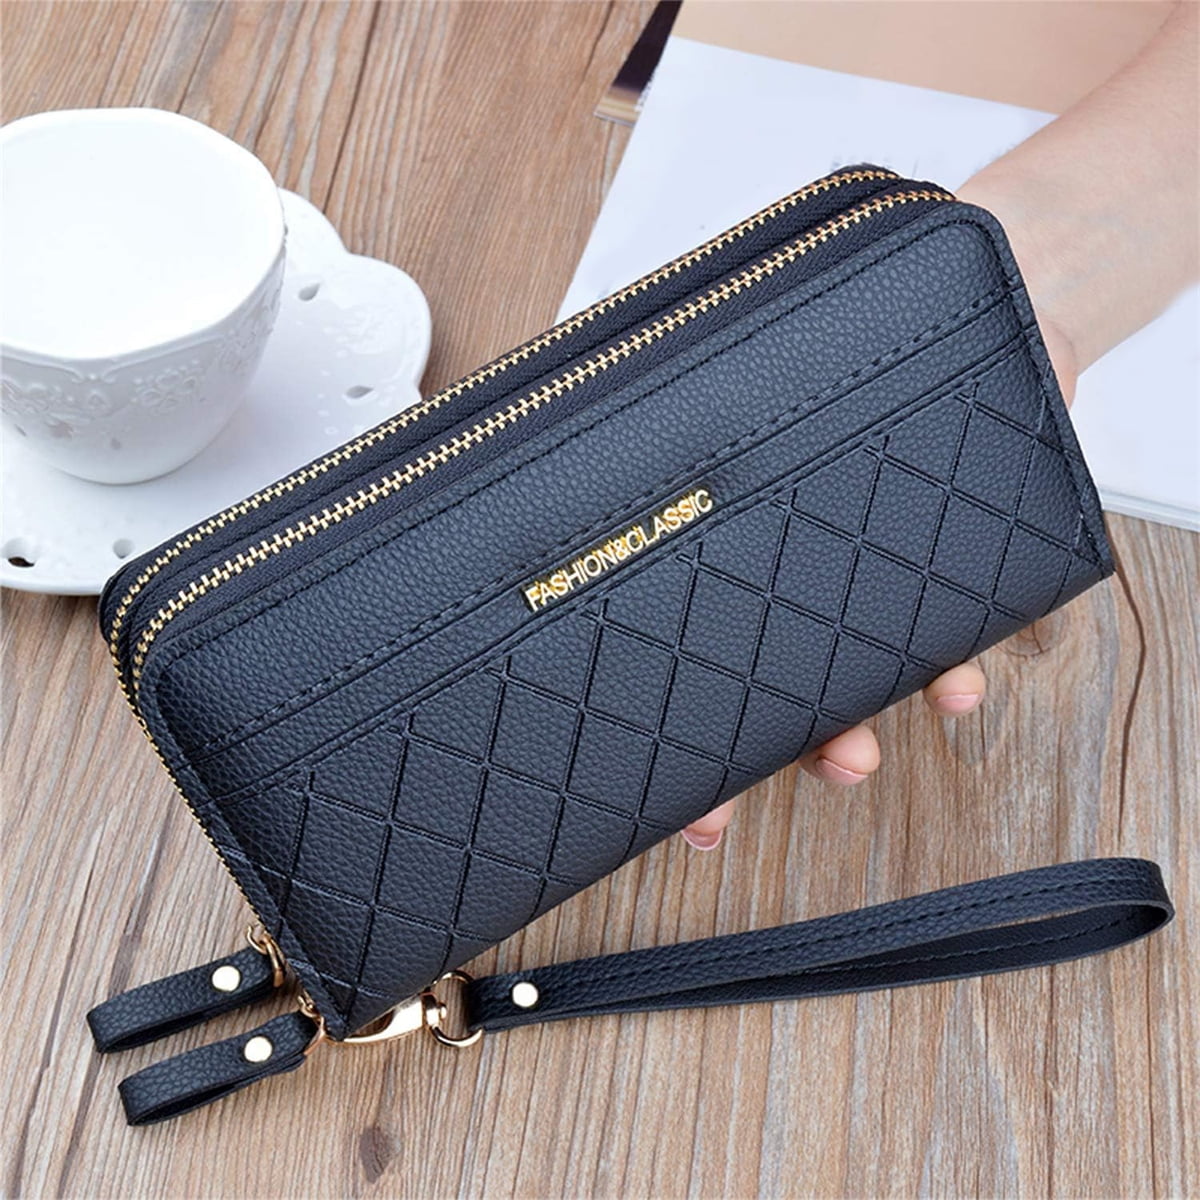 Mywalit large wallet with zip purse - Terrestra